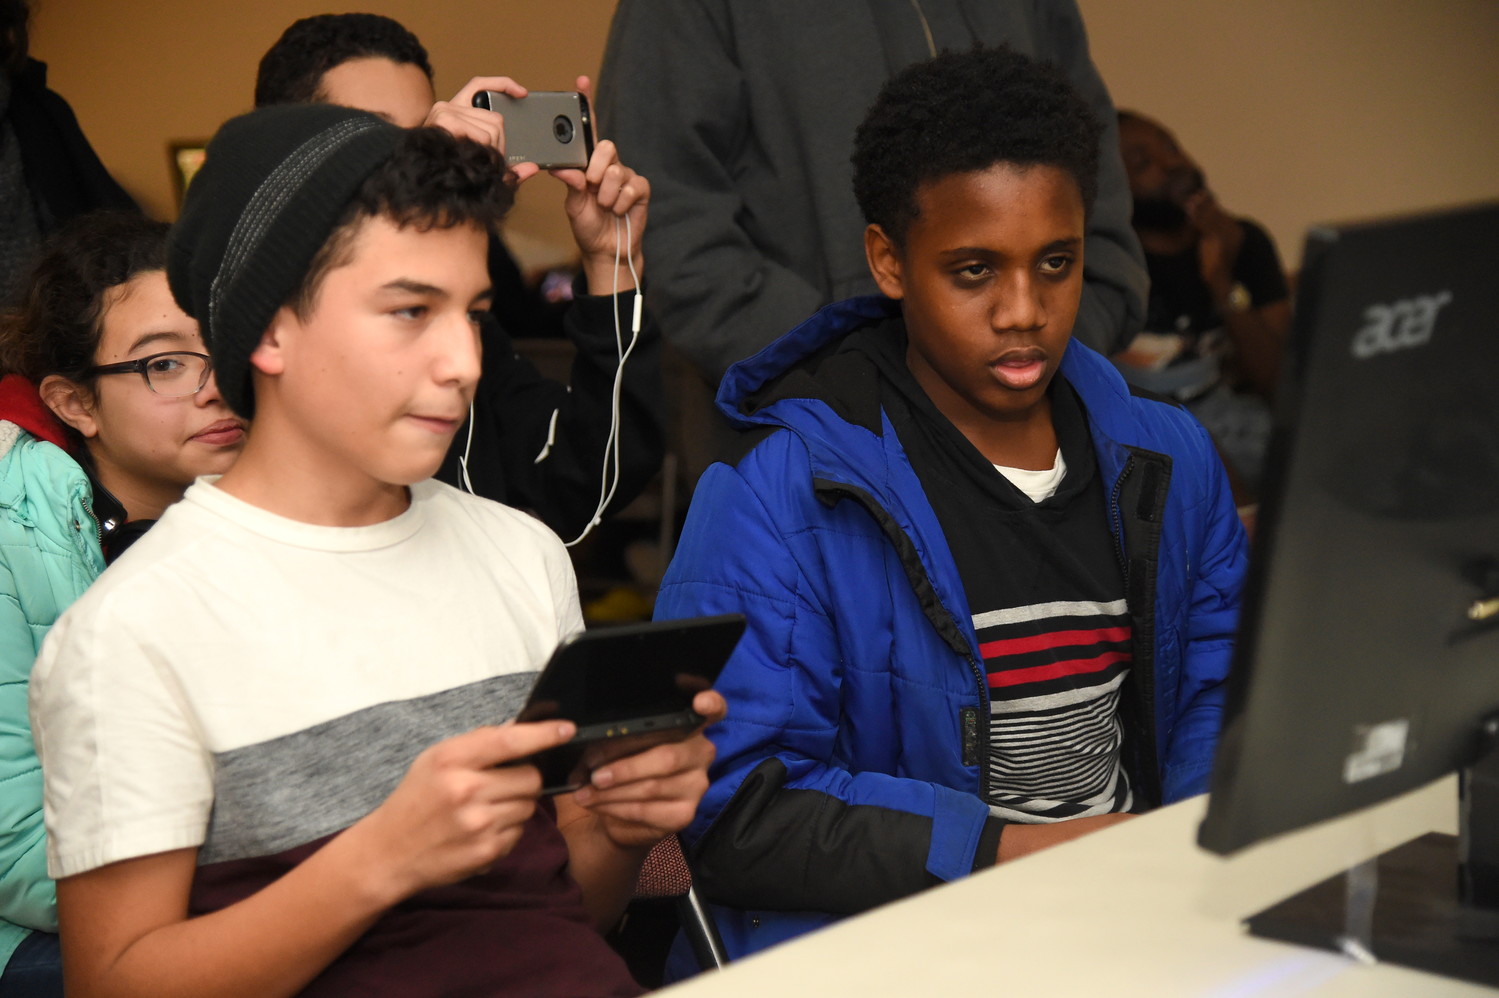 Making their way to the final round, Kenny Hernandez, 14, left and Daven Lewis, 13, right, went head to head during the Smash Freeport video game tournament held at the Freeport Memorial Library on Dec. 15.